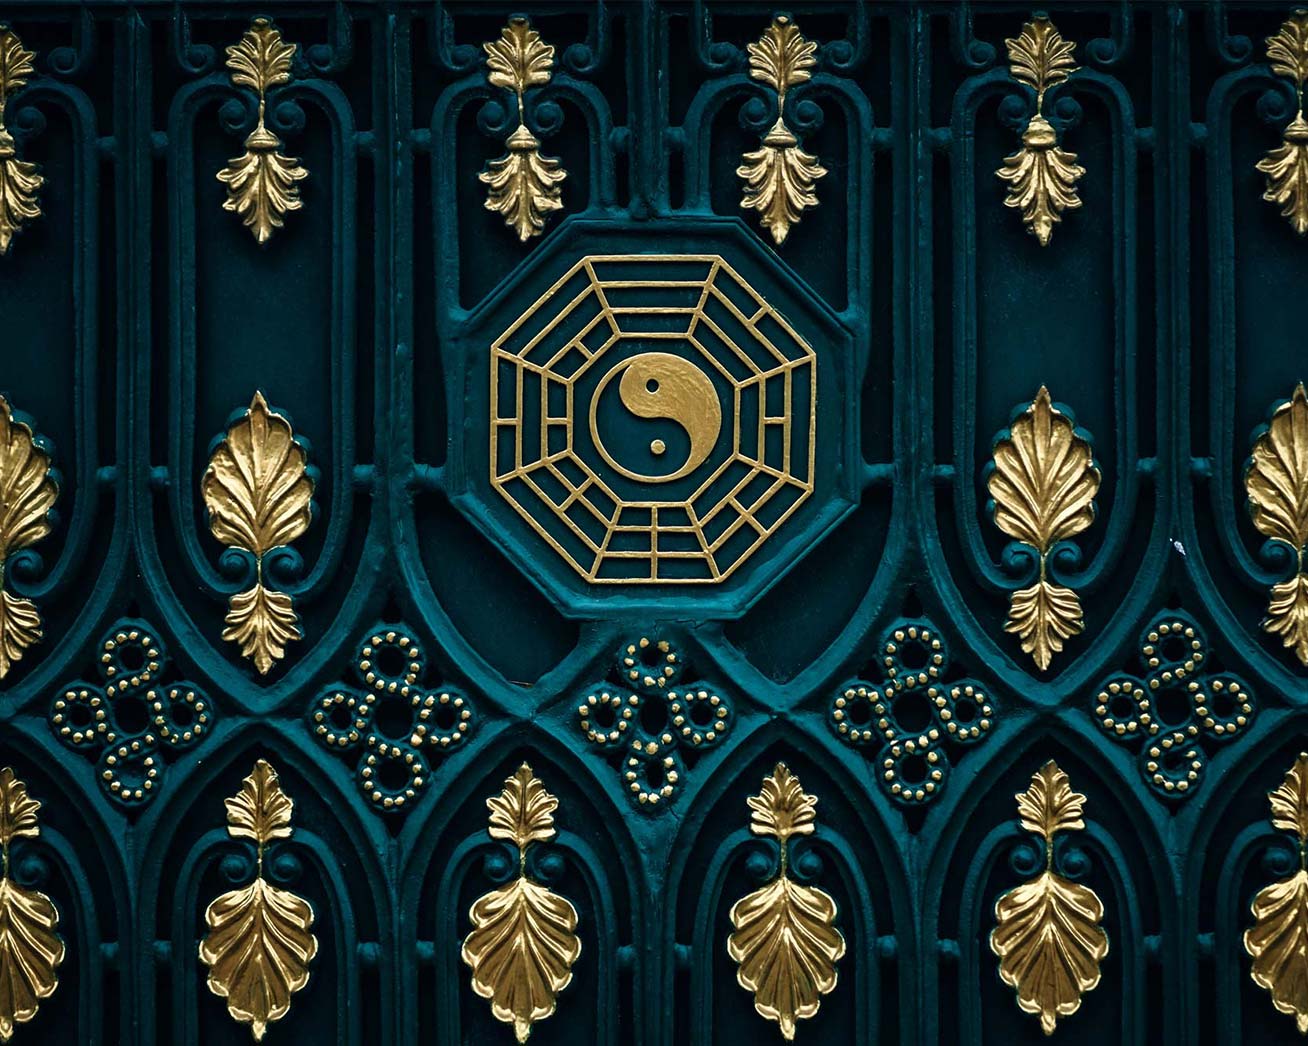 A gold and blue doorway with yin yang symbols leading into a Taoist temple